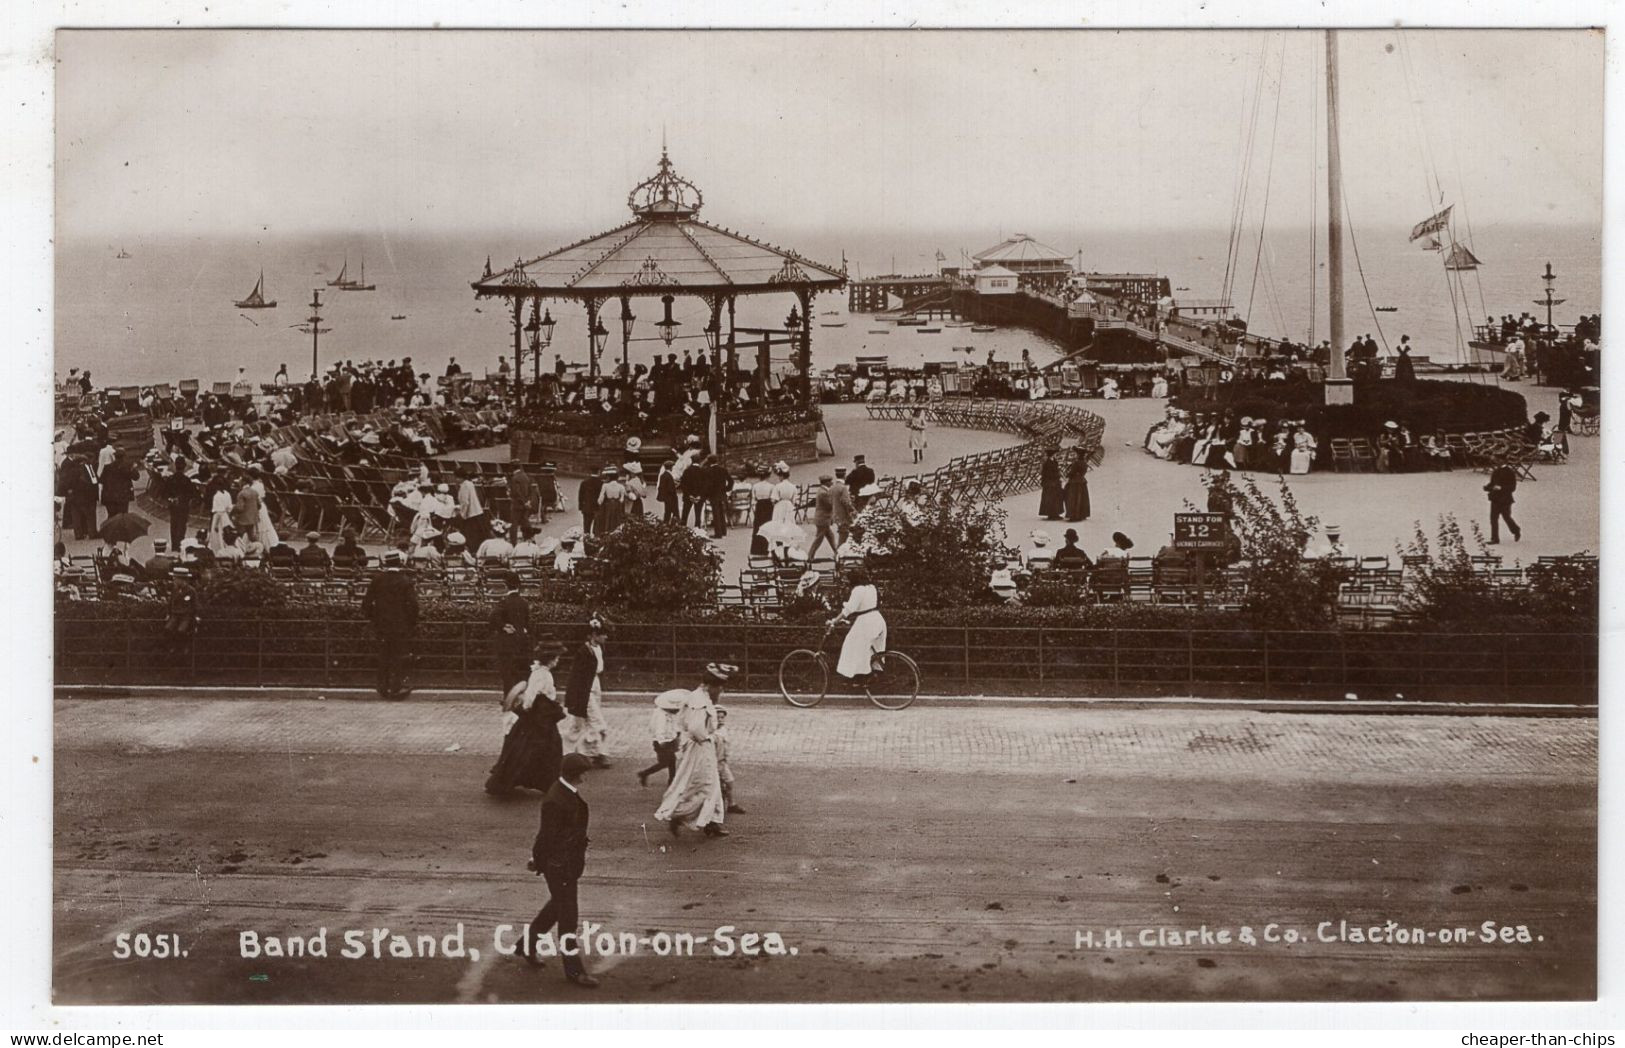 CLACTON-on-SEA - Band Stand - H.H. Clarke 5051 - Clacton On Sea